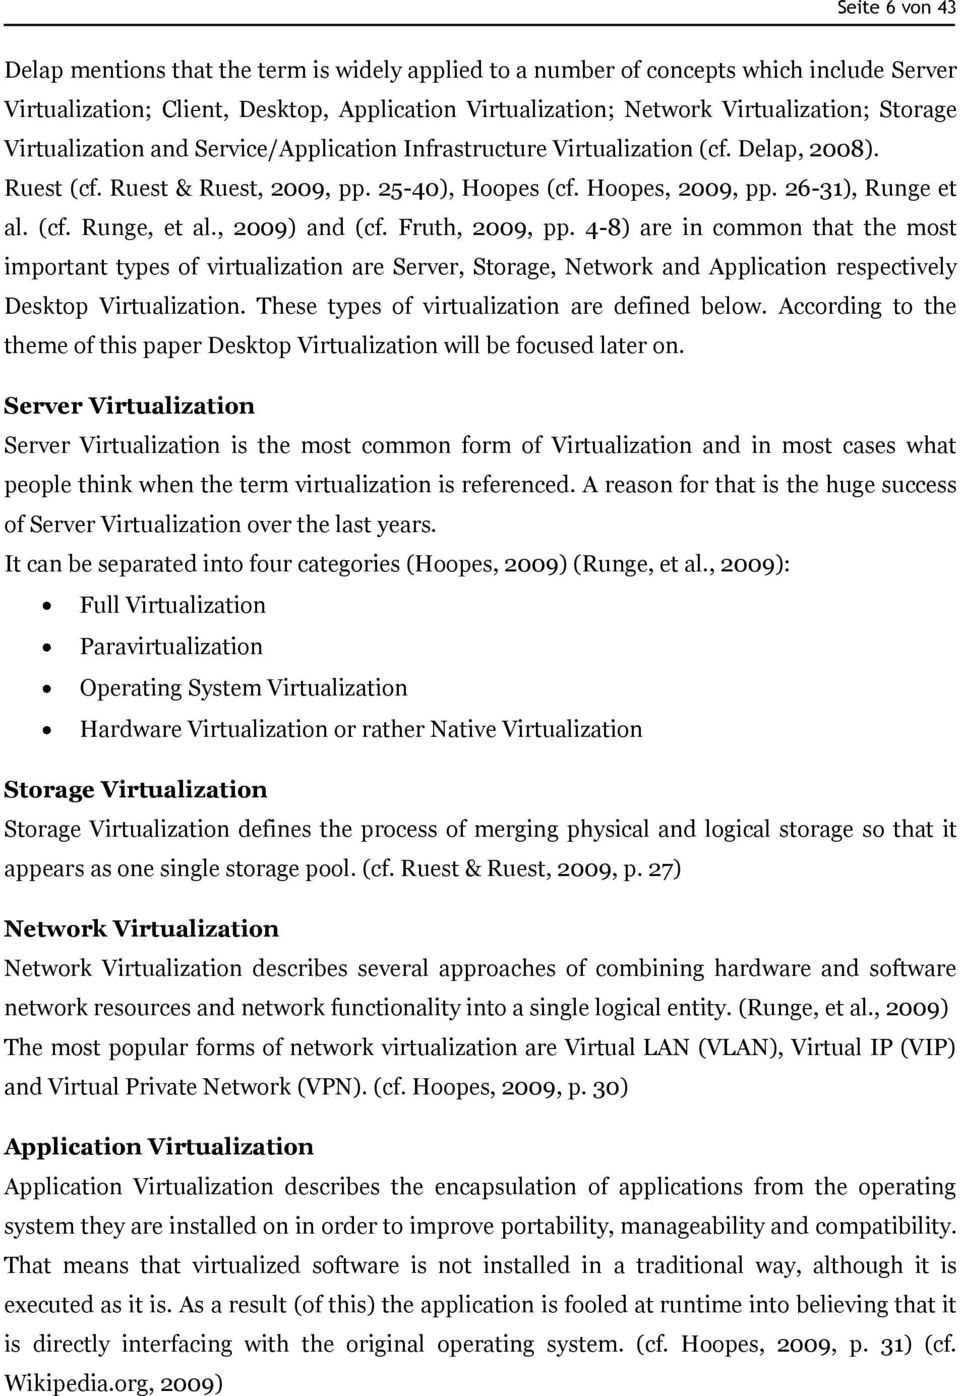 , 2009) and (cf. Fruth, 2009, pp. 4-8) are in common that the most important types of virtualization are Server, Storage, Network and Application respectively Desktop Virtualization.